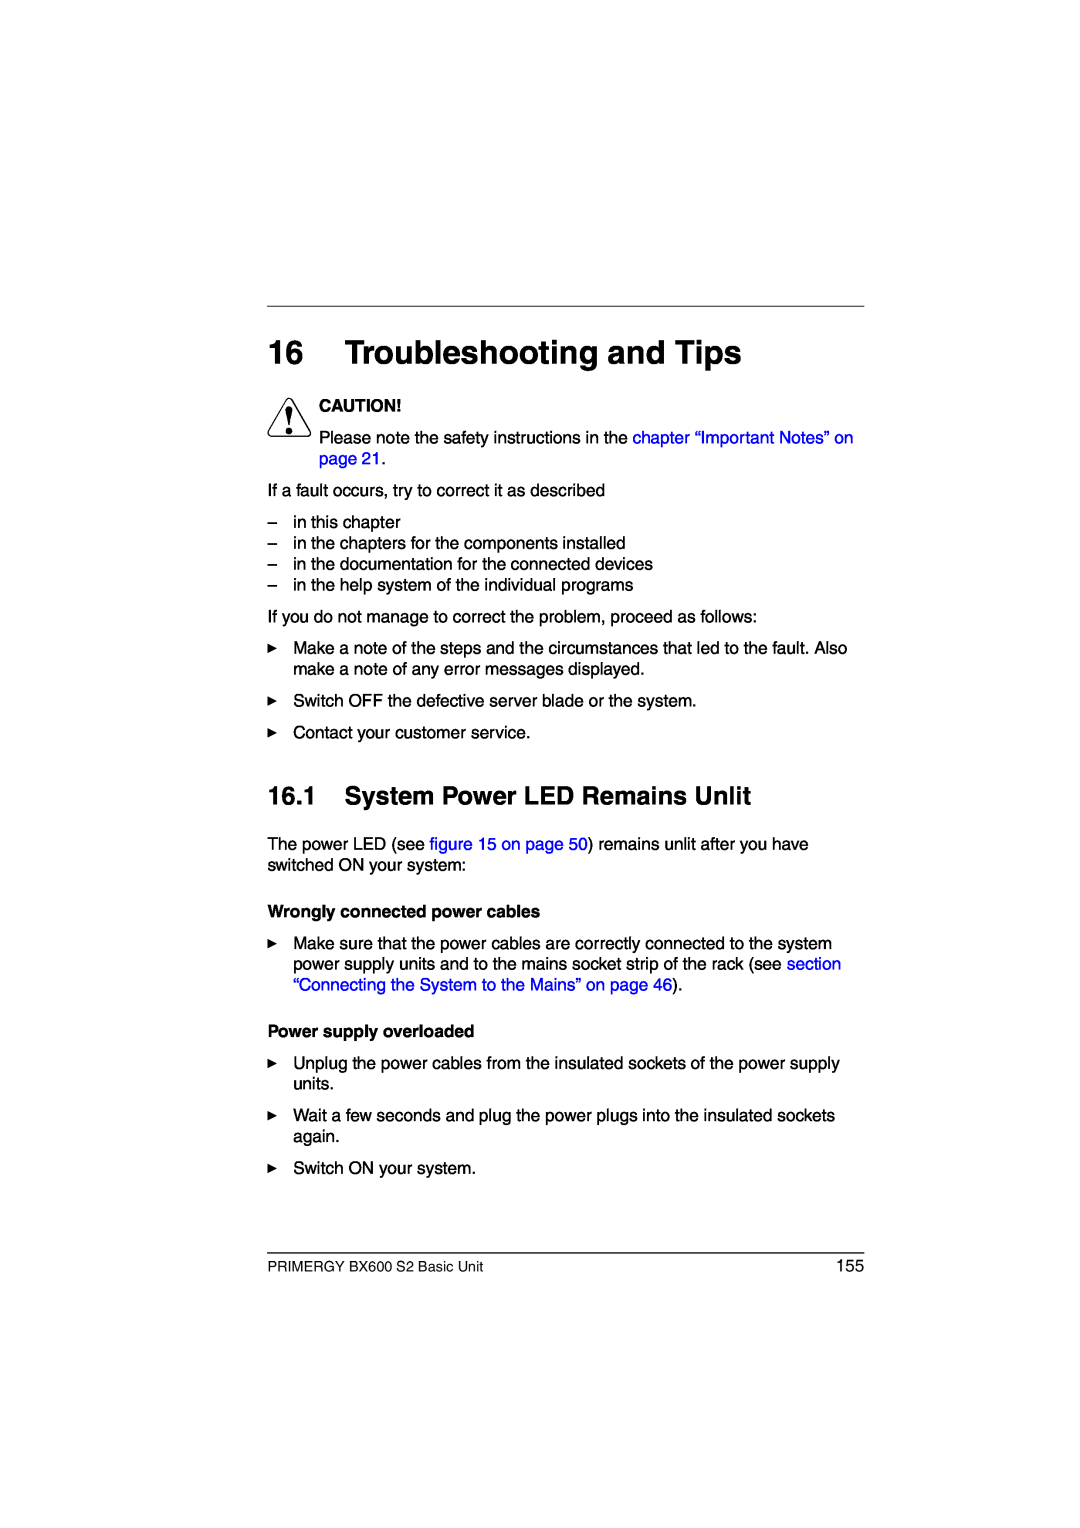 Fujitsu BX600 S2 manual Troubleshooting and Tips, System Power LED Remains Unlit, Wrongly connected power cables, V Caution 